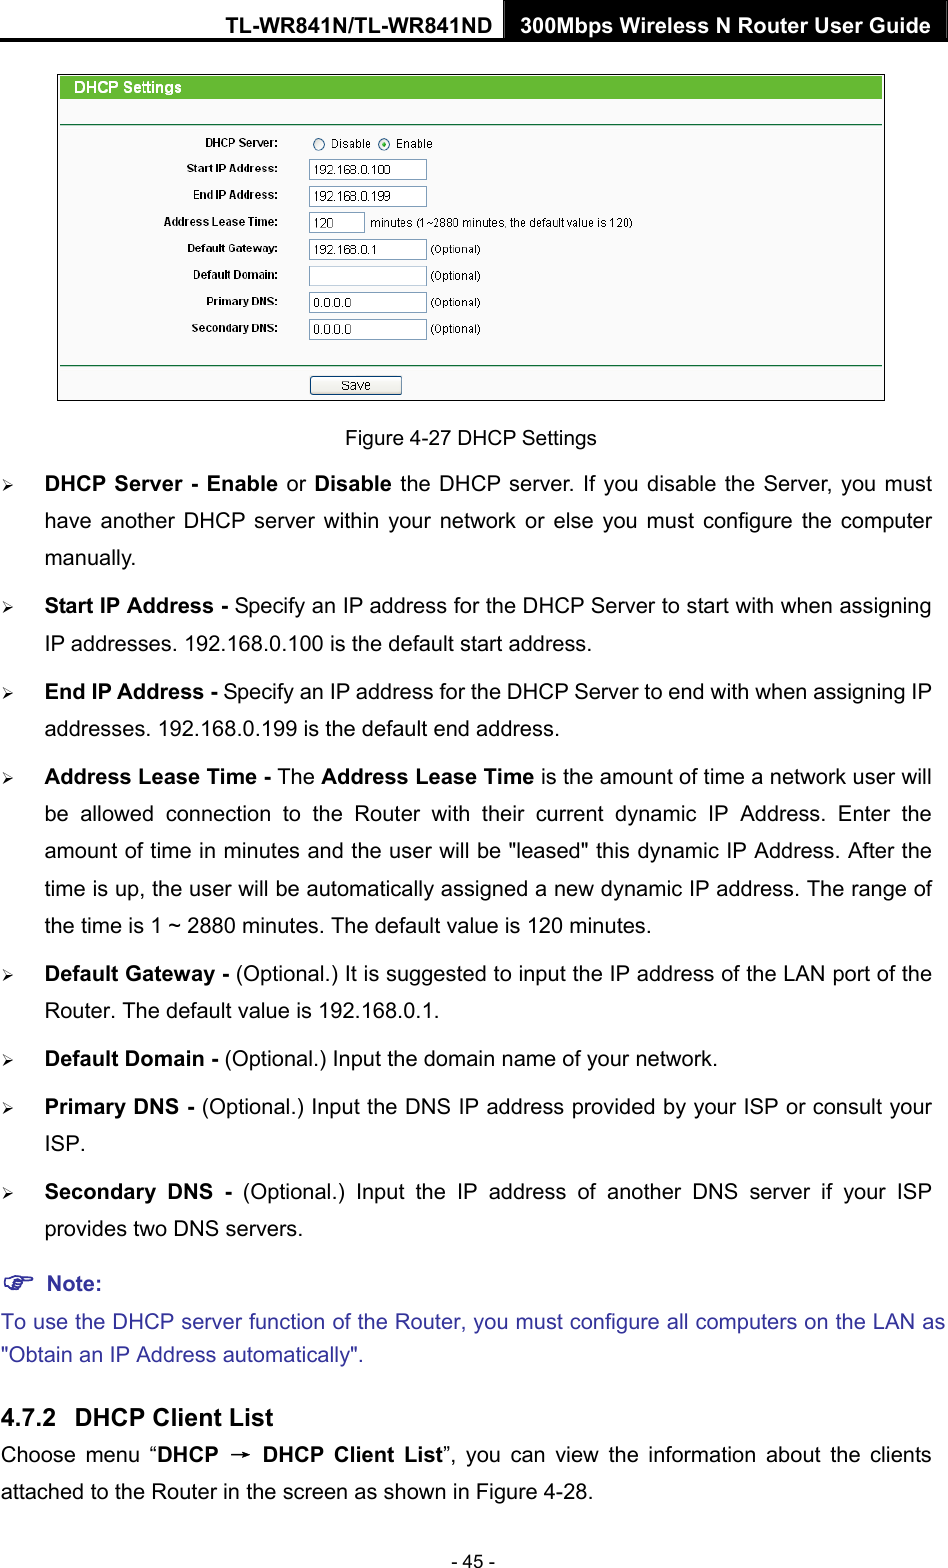 TL-WR841N/TL-WR841ND 300Mbps Wireless N Router User Guide - 45 -  Figure 4-27 DHCP Settings ¾ DHCP Server - Enable or Disable the DHCP server. If you disable the Server, you must have another DHCP server within your network or else you must configure the computer manually. ¾ Start IP Address - Specify an IP address for the DHCP Server to start with when assigning IP addresses. 192.168.0.100 is the default start address. ¾ End IP Address - Specify an IP address for the DHCP Server to end with when assigning IP addresses. 192.168.0.199 is the default end address. ¾ Address Lease Time - The Address Lease Time is the amount of time a network user will be allowed connection to the Router with their current dynamic IP Address. Enter the amount of time in minutes and the user will be &quot;leased&quot; this dynamic IP Address. After the time is up, the user will be automatically assigned a new dynamic IP address. The range of the time is 1 ~ 2880 minutes. The default value is 120 minutes. ¾ Default Gateway - (Optional.) It is suggested to input the IP address of the LAN port of the Router. The default value is 192.168.0.1. ¾ Default Domain - (Optional.) Input the domain name of your network. ¾ Primary DNS - (Optional.) Input the DNS IP address provided by your ISP or consult your ISP. ¾ Secondary DNS - (Optional.) Input the IP address of another DNS server if your ISP provides two DNS servers. ) Note: To use the DHCP server function of the Router, you must configure all computers on the LAN as &quot;Obtain an IP Address automatically&quot;. 4.7.2  DHCP Client List Choose menu “DHCP  → DHCP Client List”, you can view the information about the clients attached to the Router in the screen as shown in Figure 4-28. 